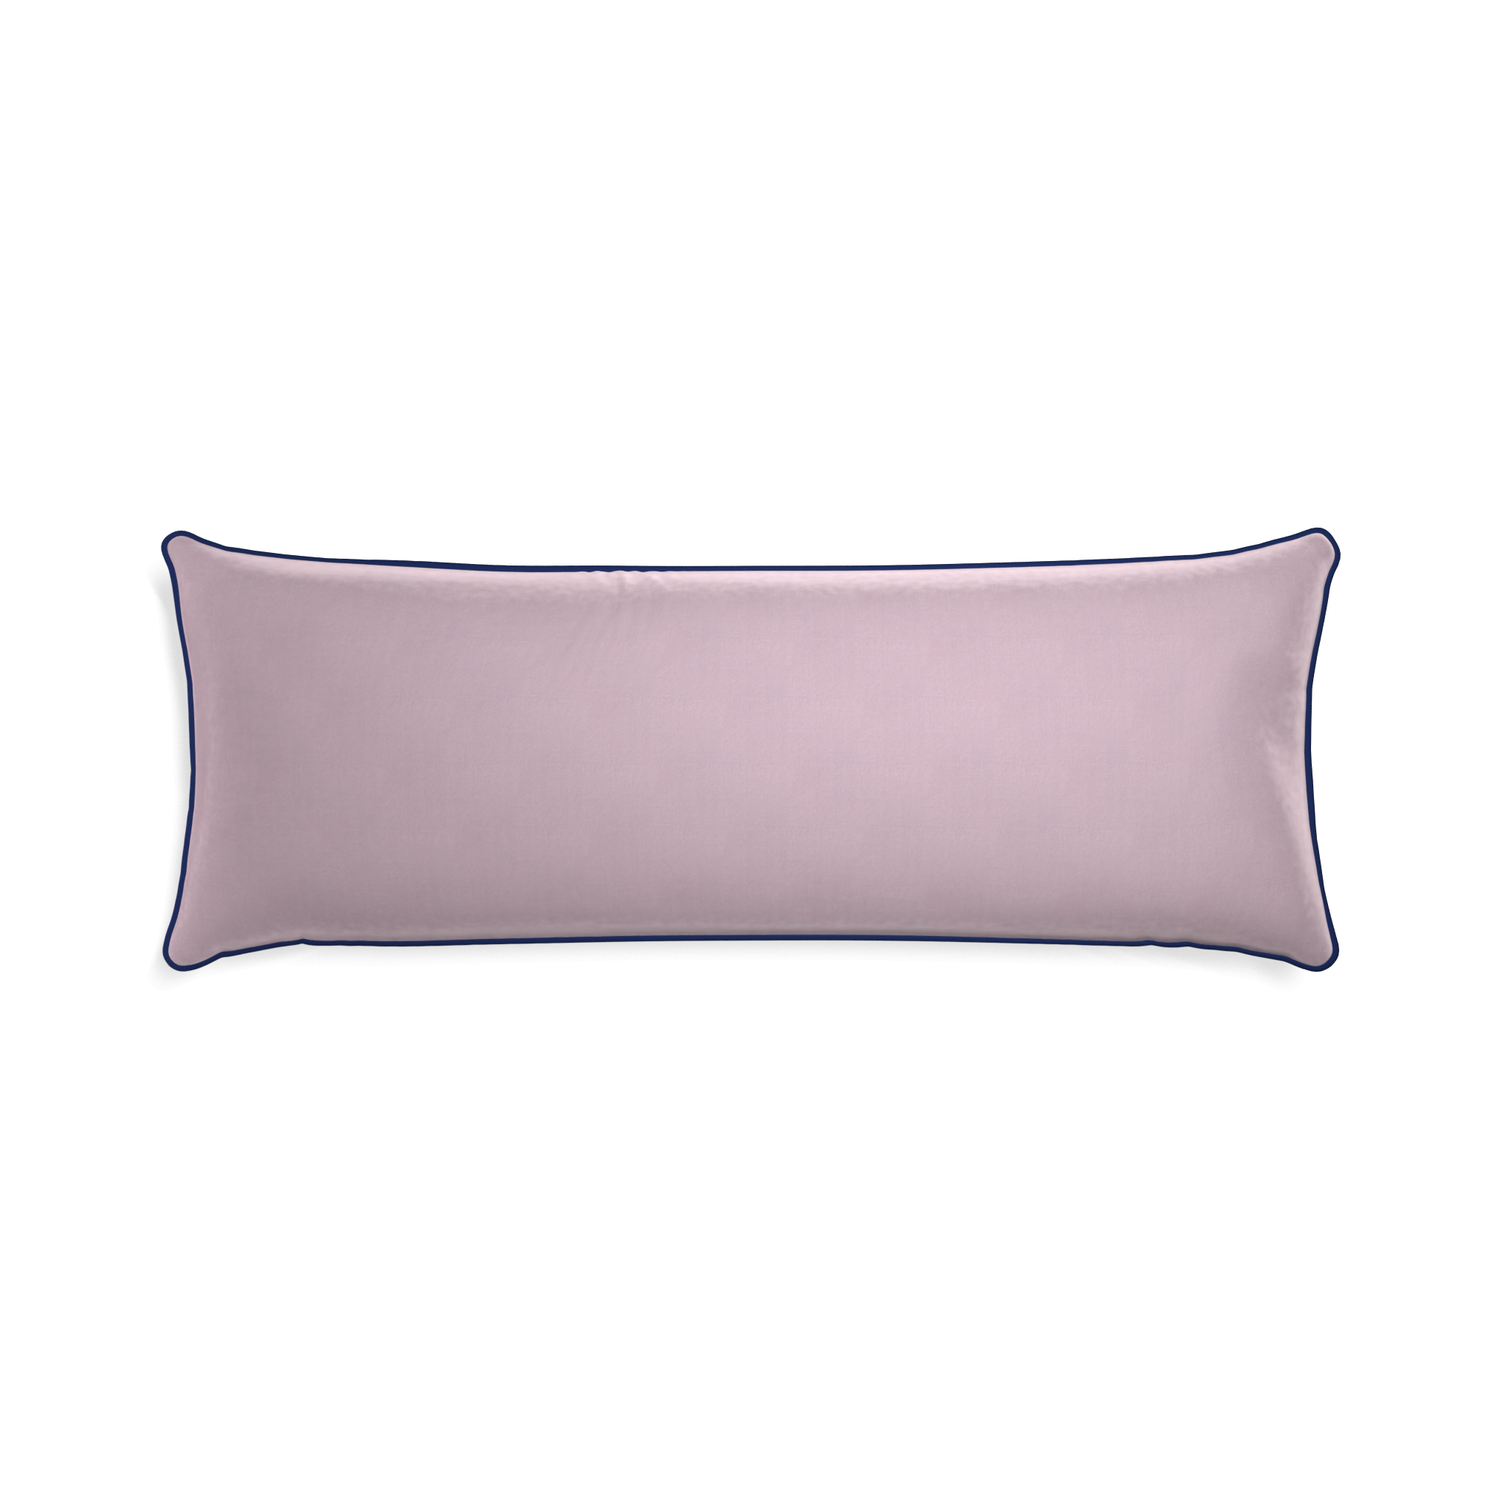 Xl-lumbar lilac velvet custom pillow with midnight piping on white background